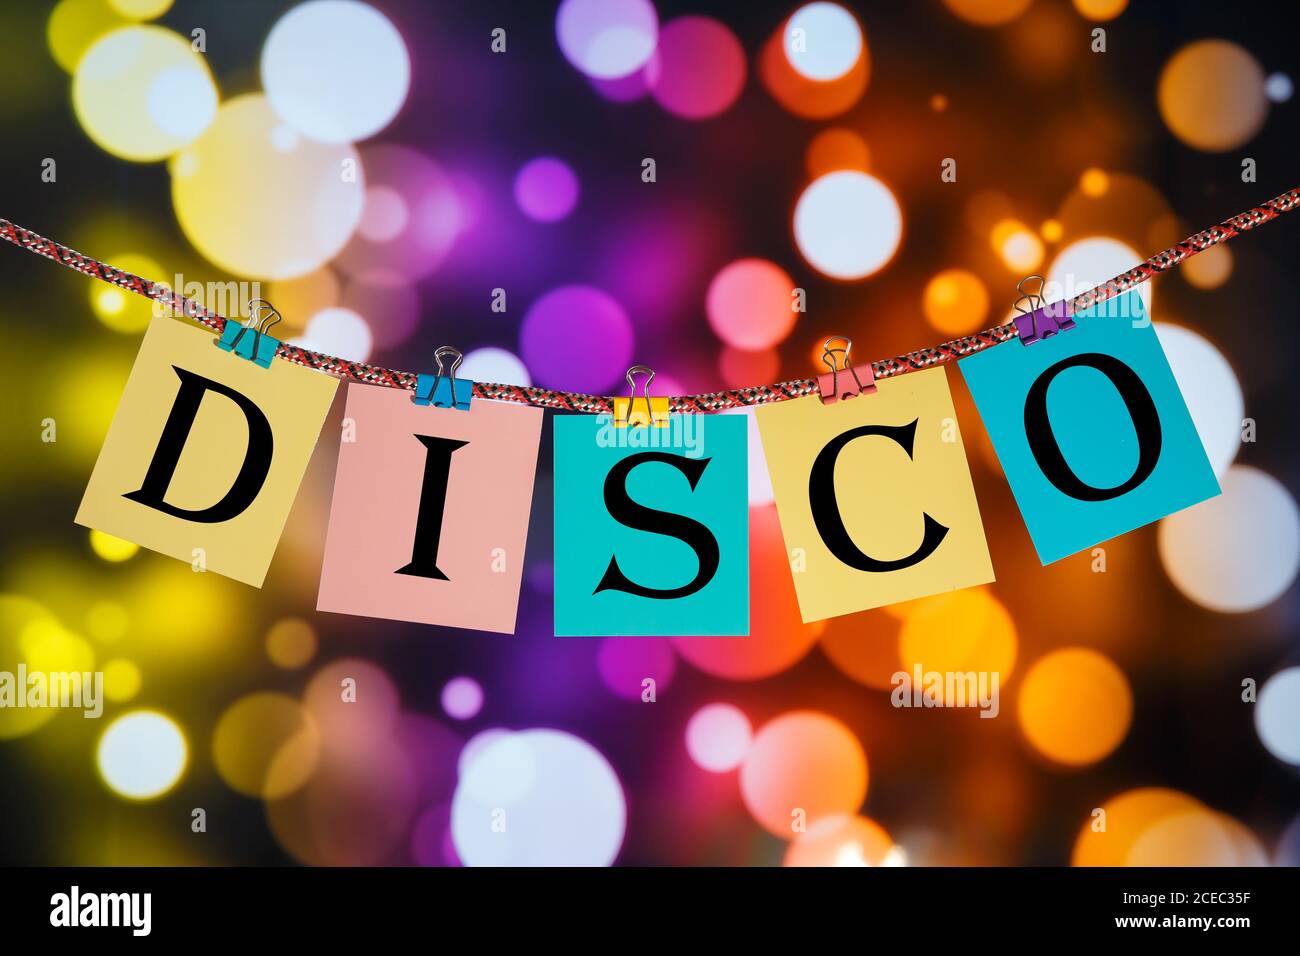 The letters DISCO sign hanging on a clothespin on a background of multi-colored lights. Stock Photo